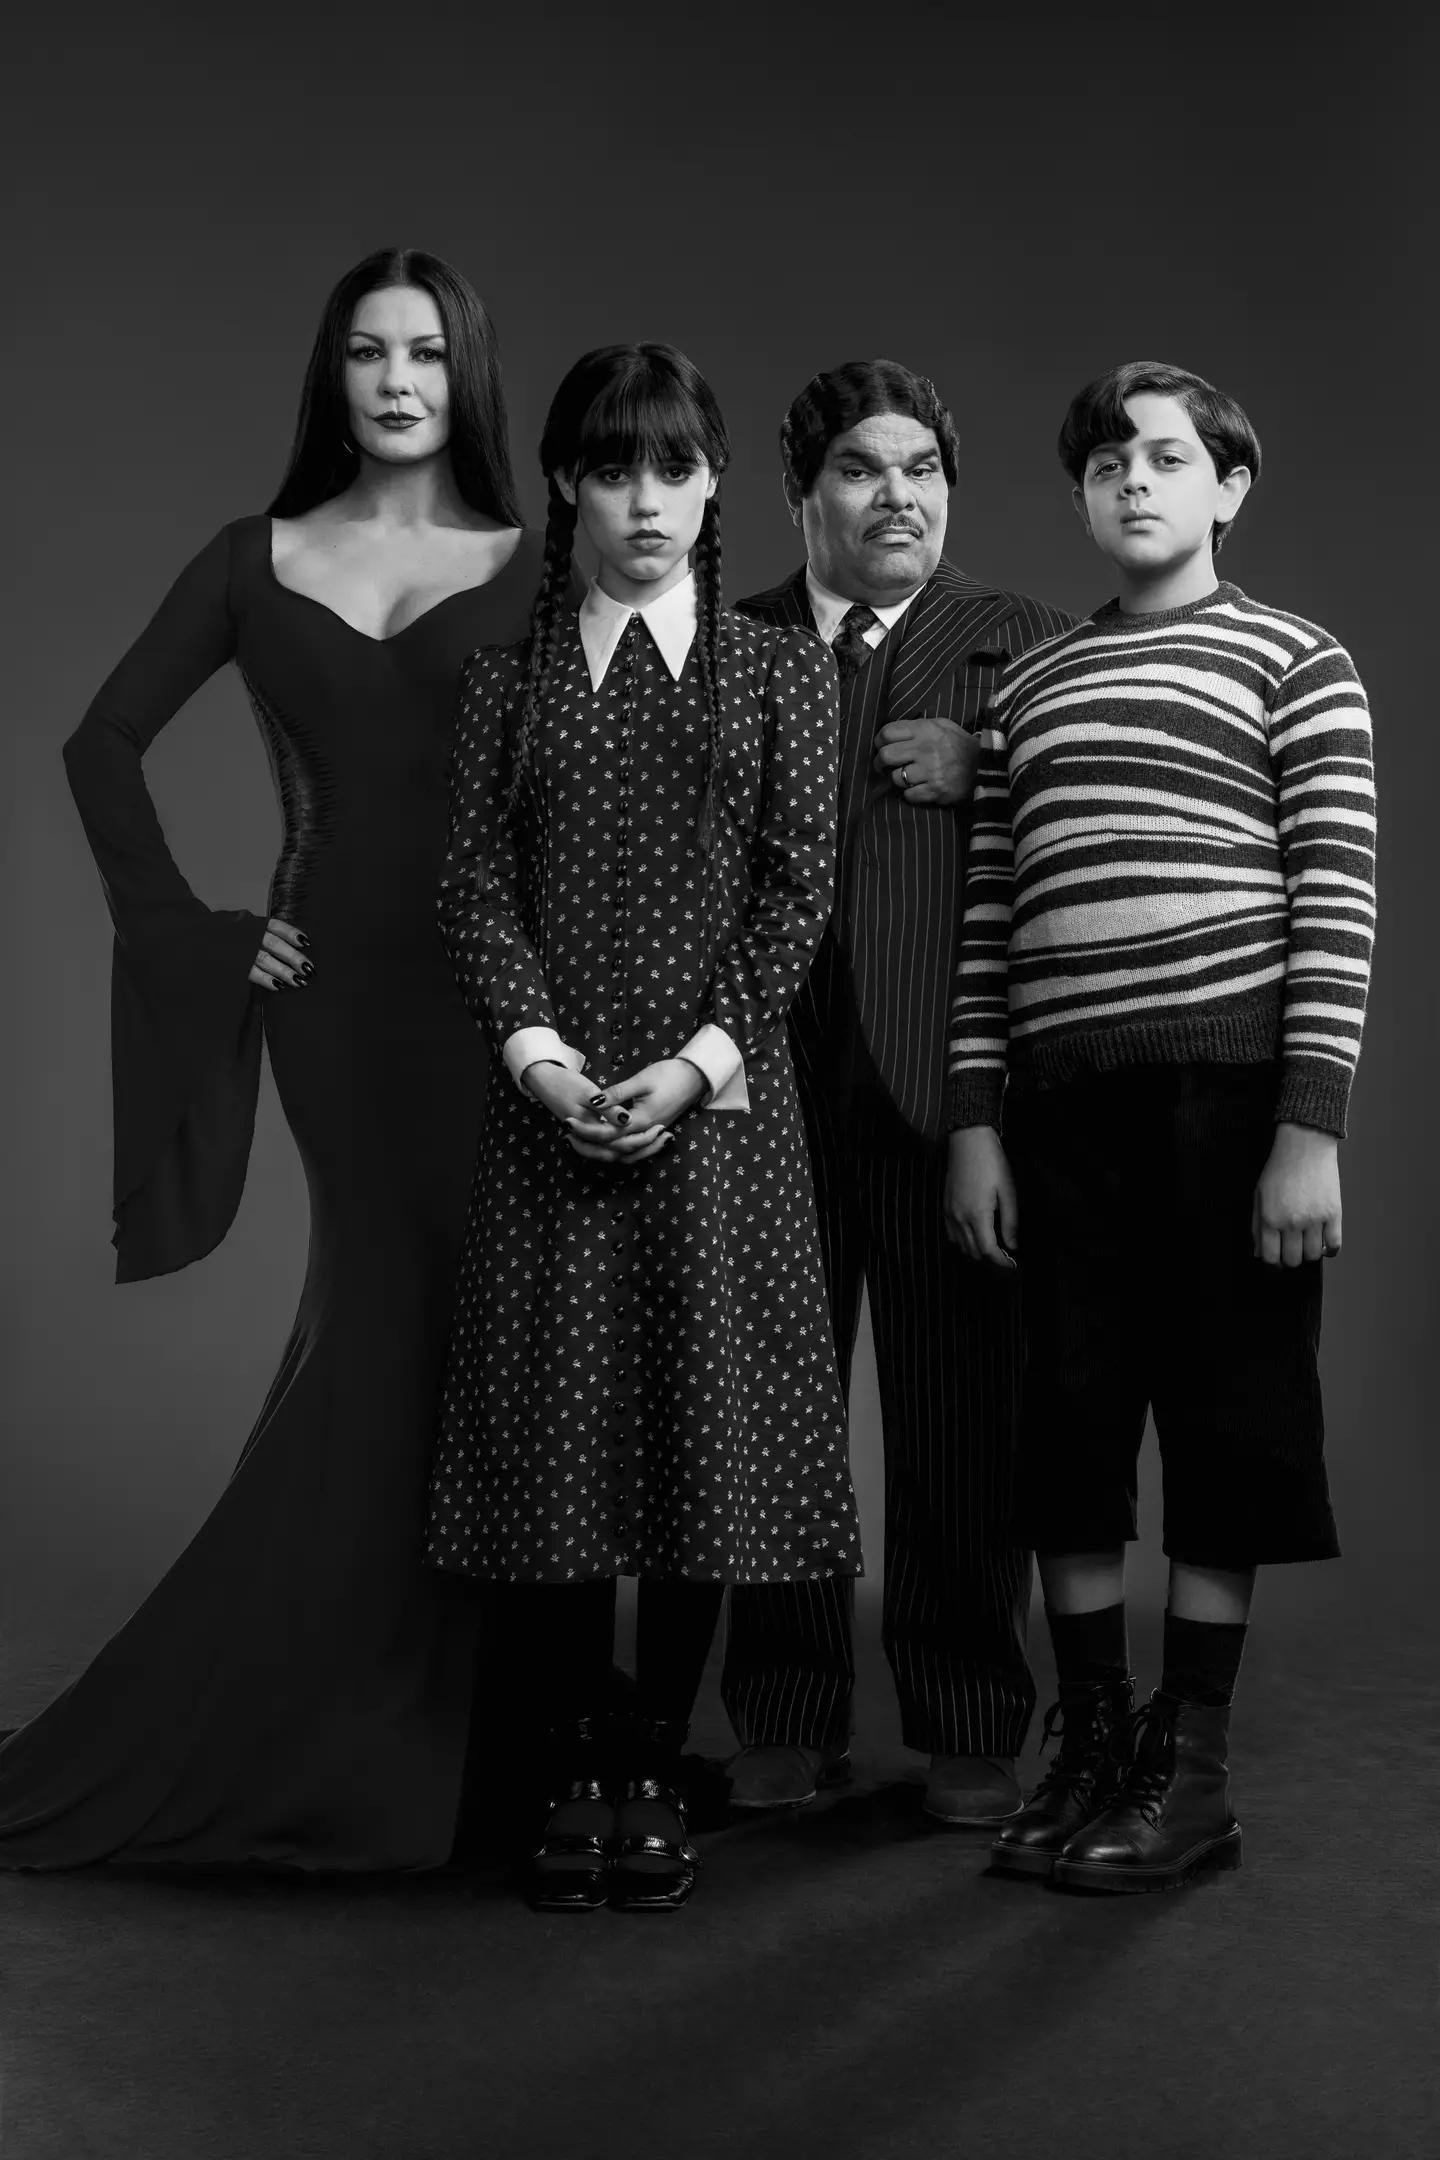 Meet the new Addams Family, as seen in Wednesday.